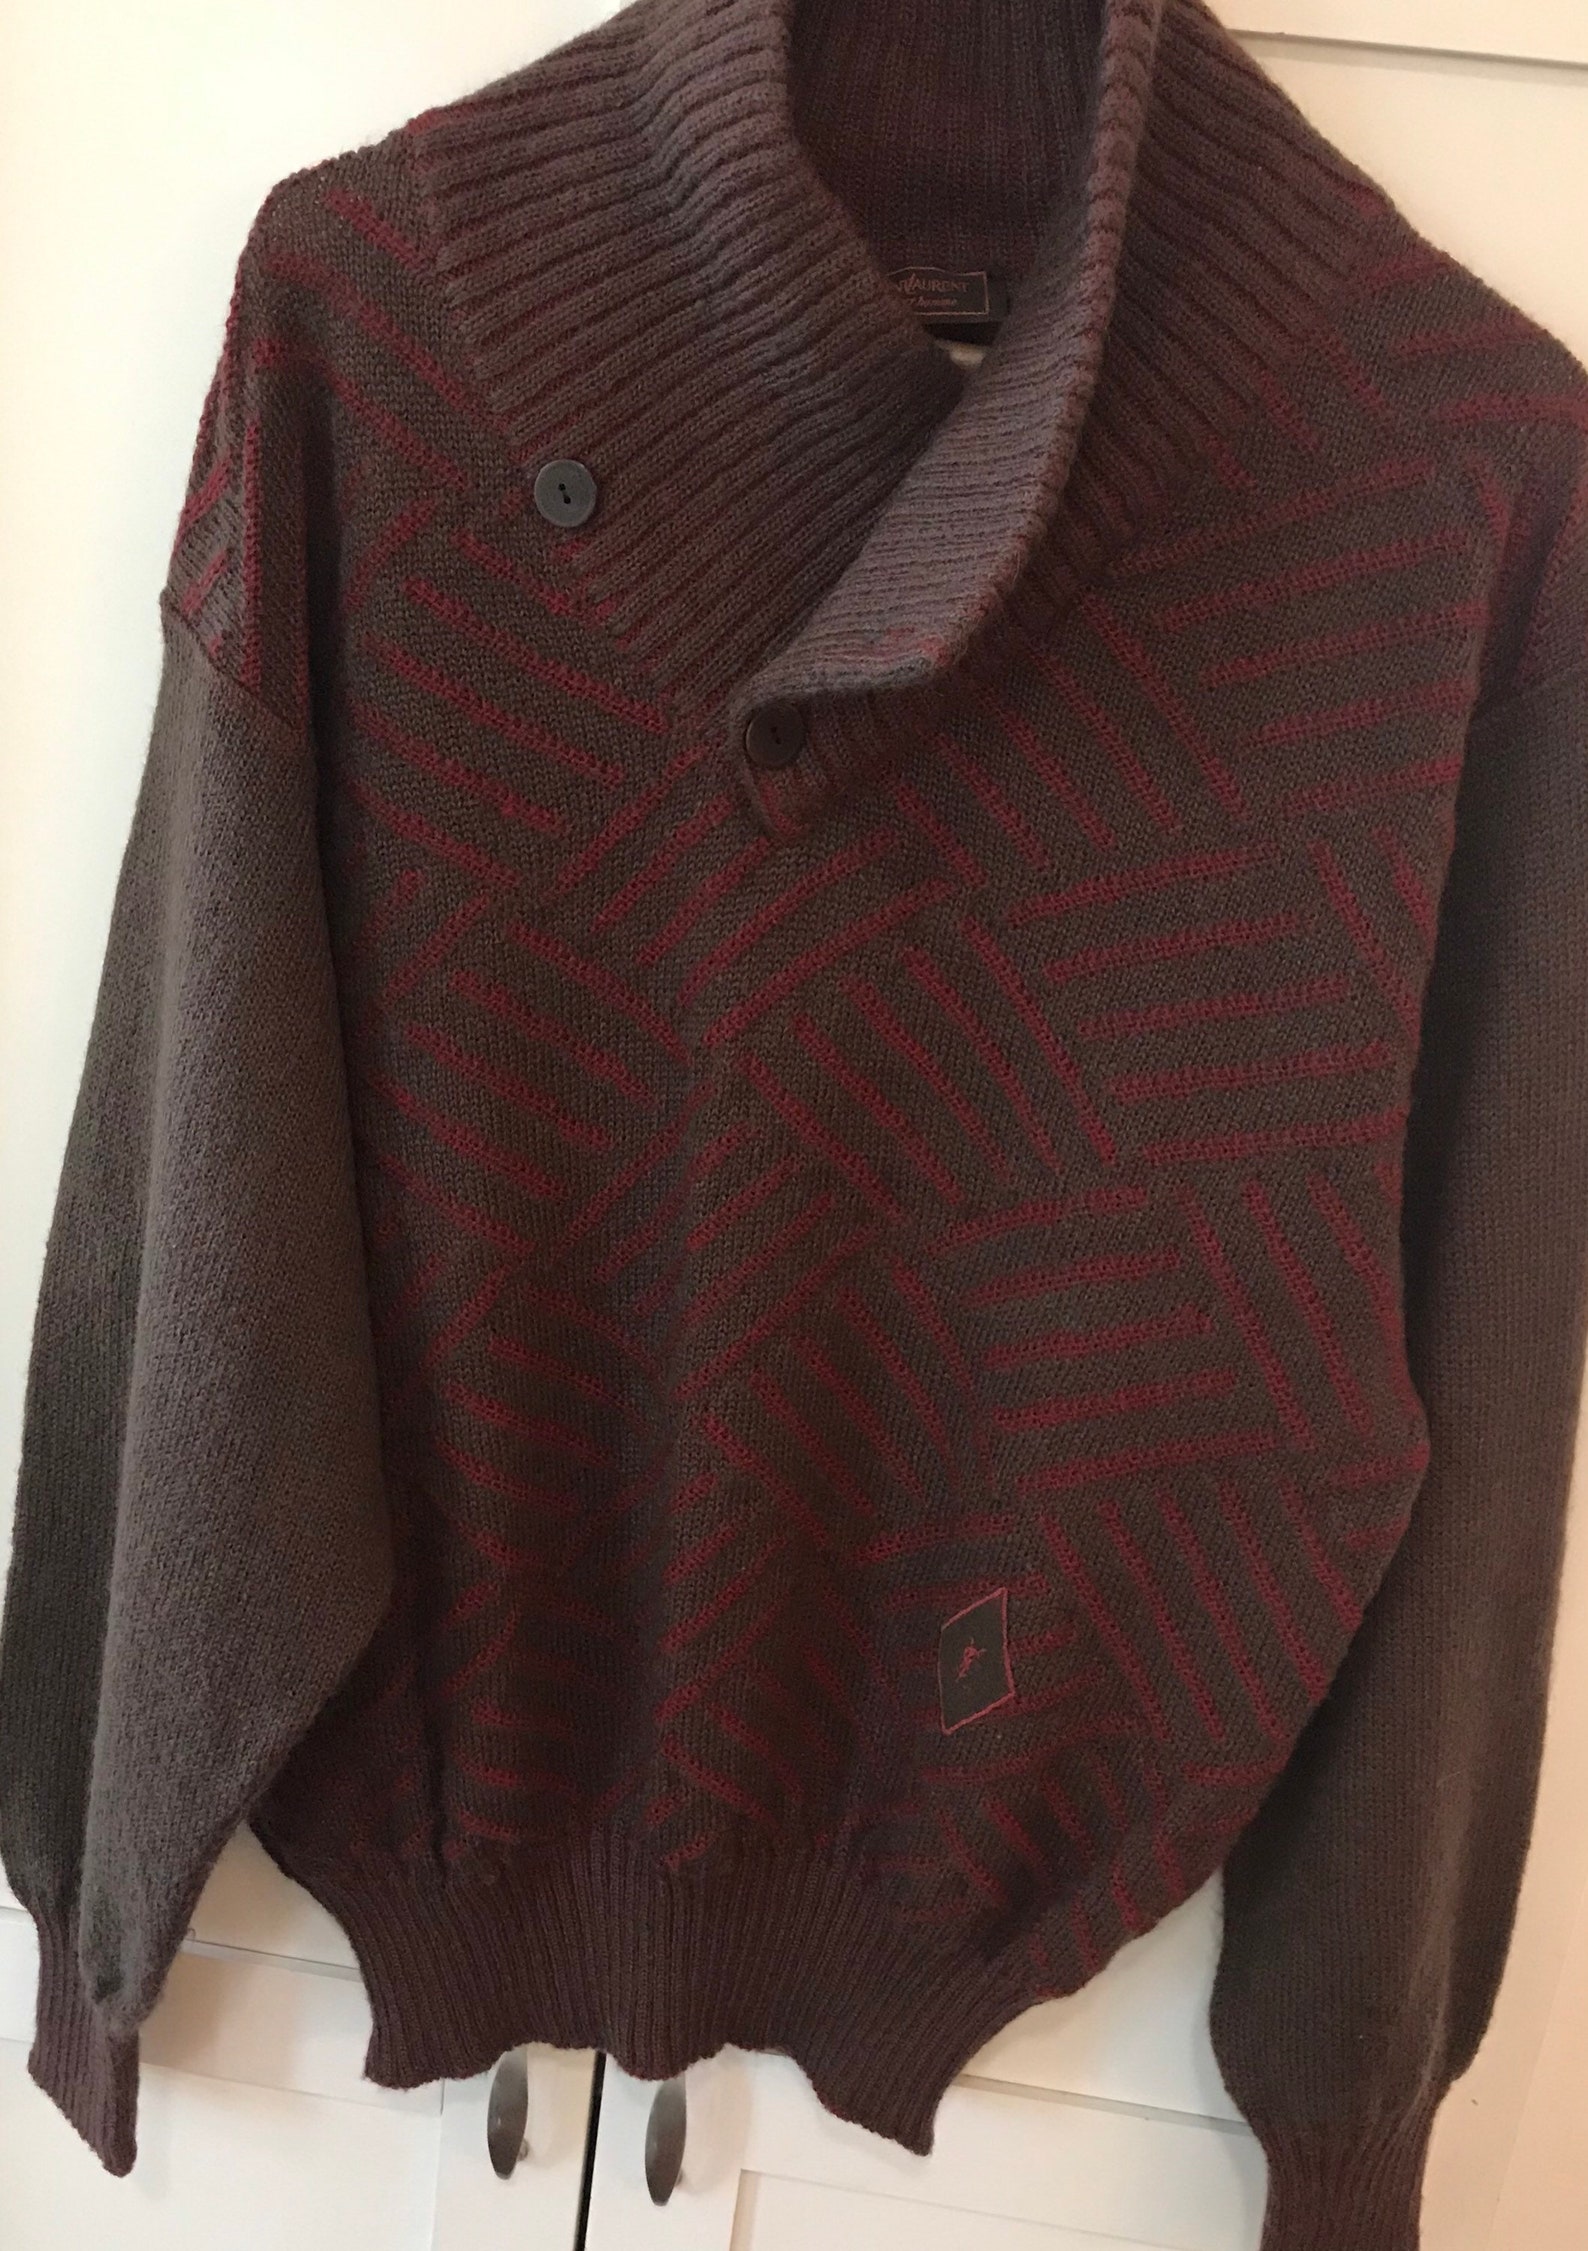 Vintage Yves Saint Laurent sweater red and brown pullover | Etsy